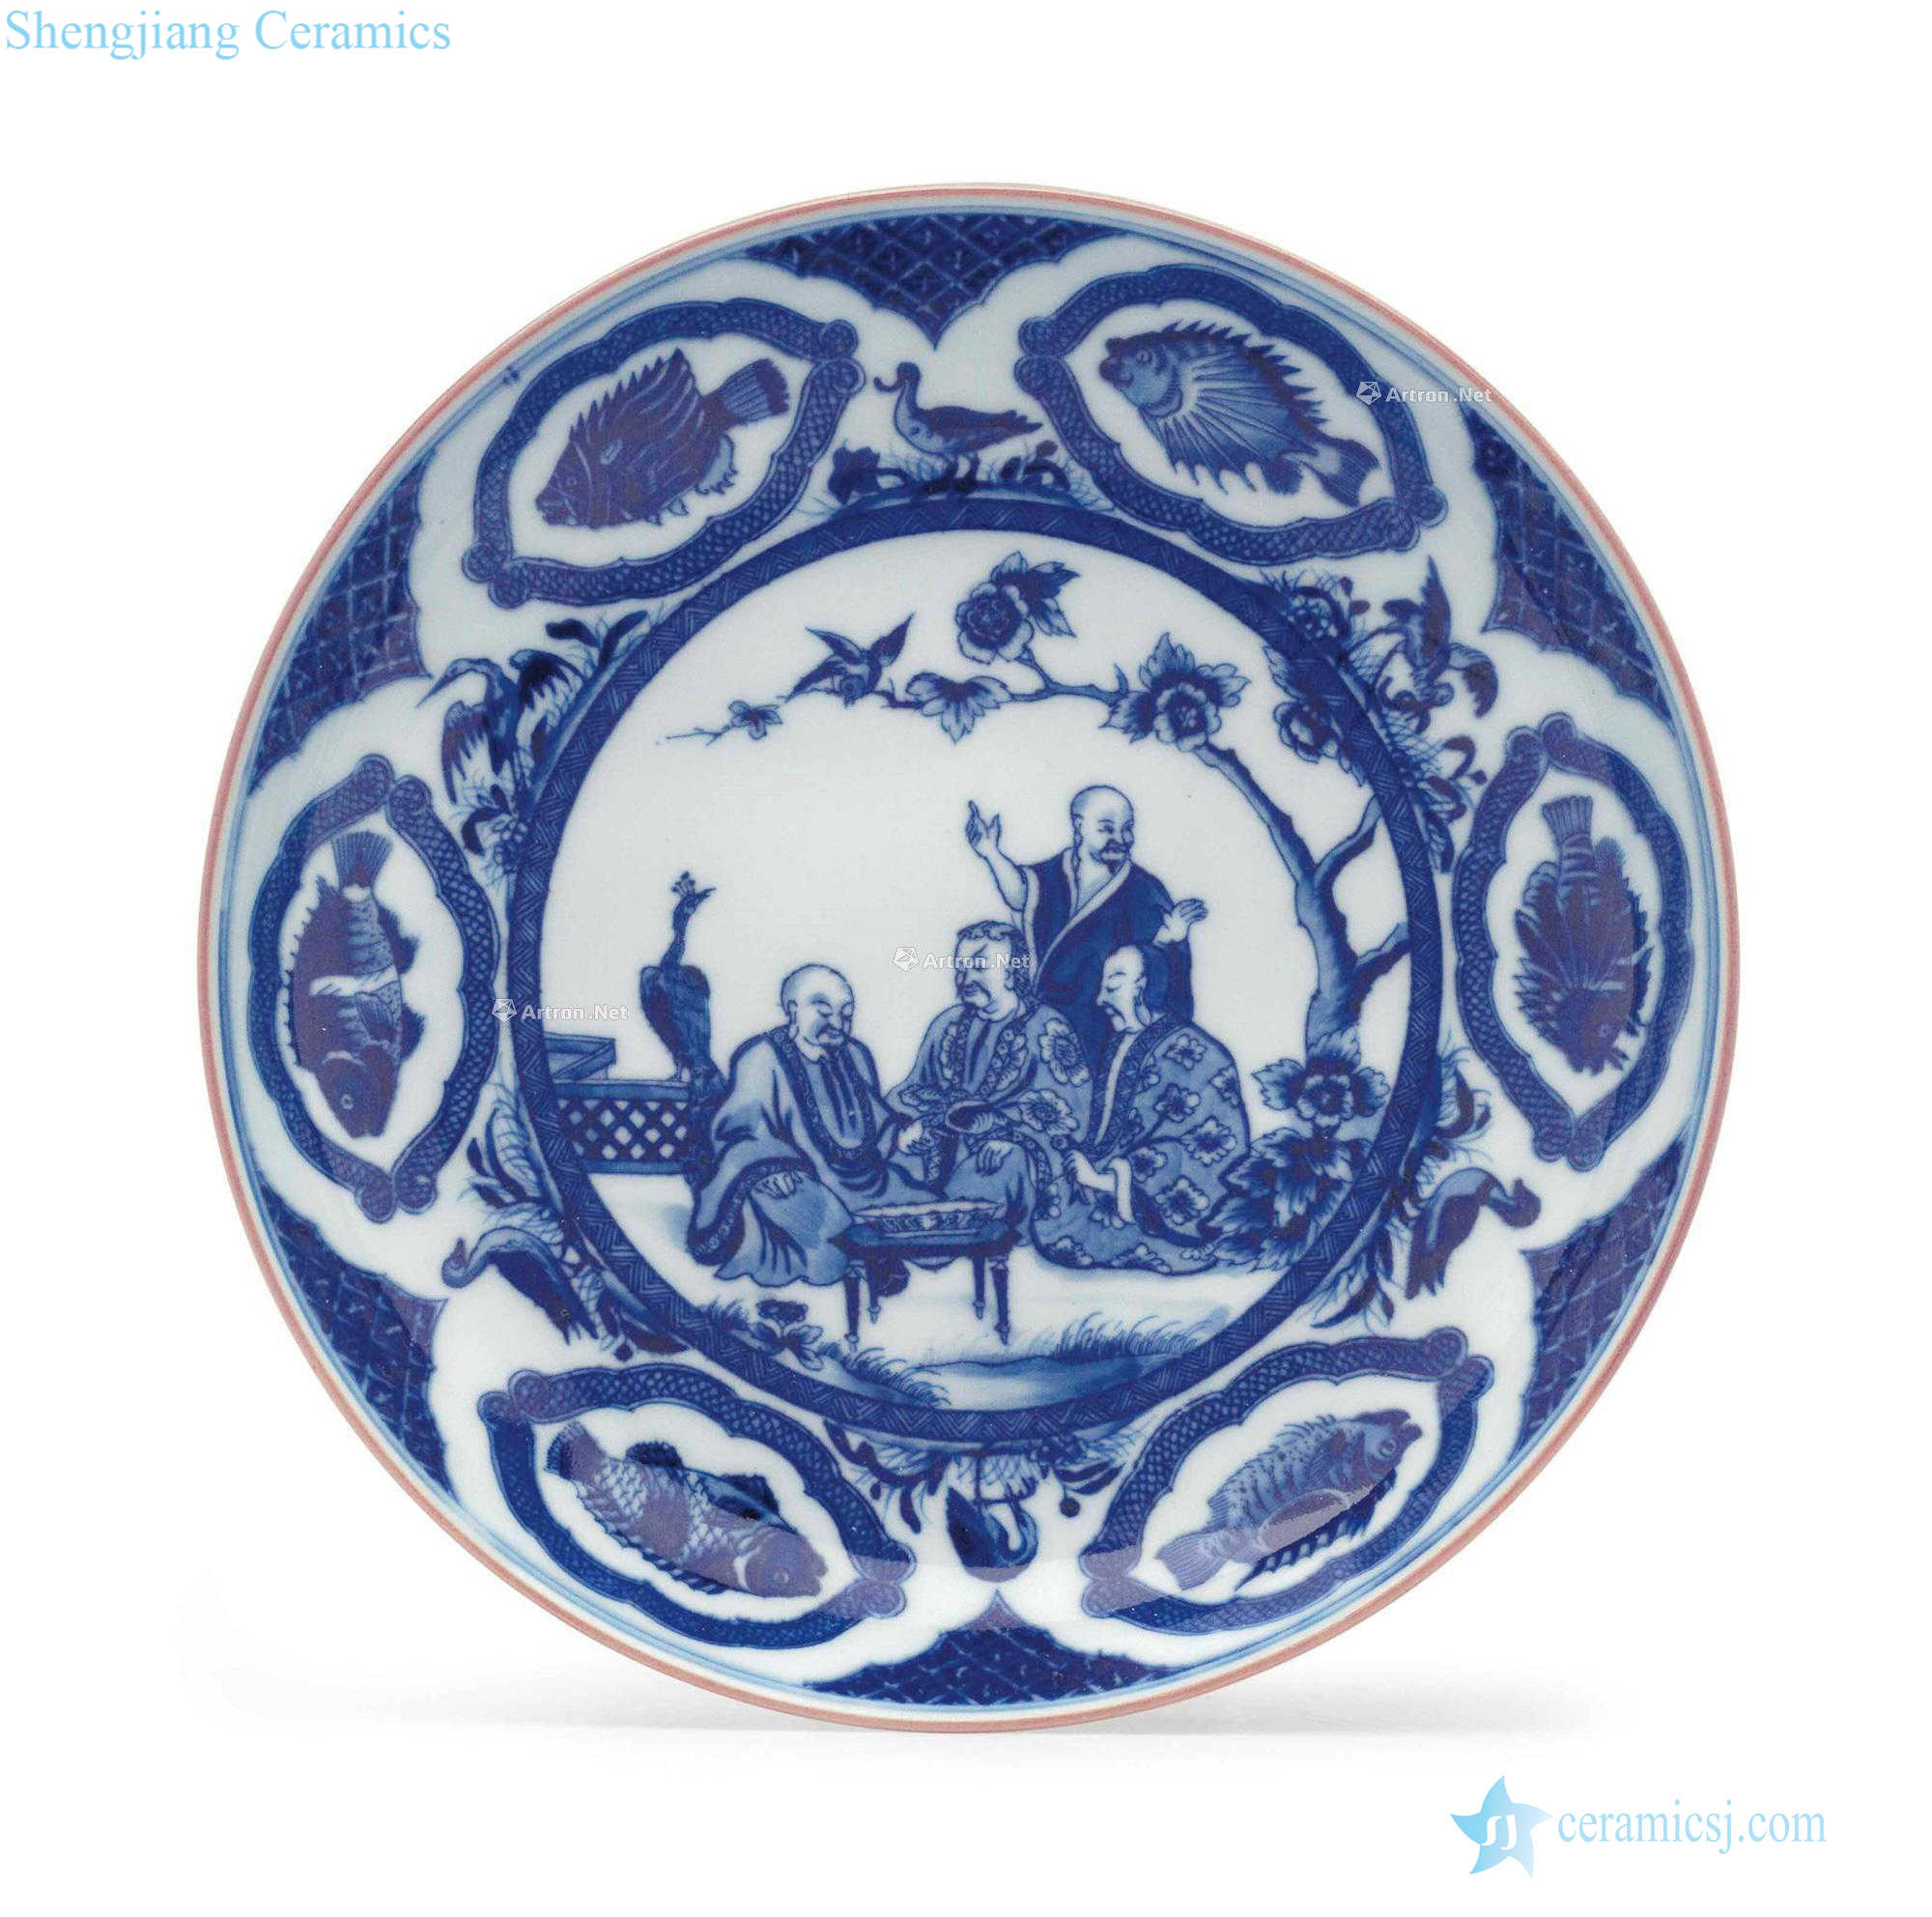 Qianlong period, about 1737 A BLUE AND WHITE "PRONK DOCTOR 'S' SAUCER DISH